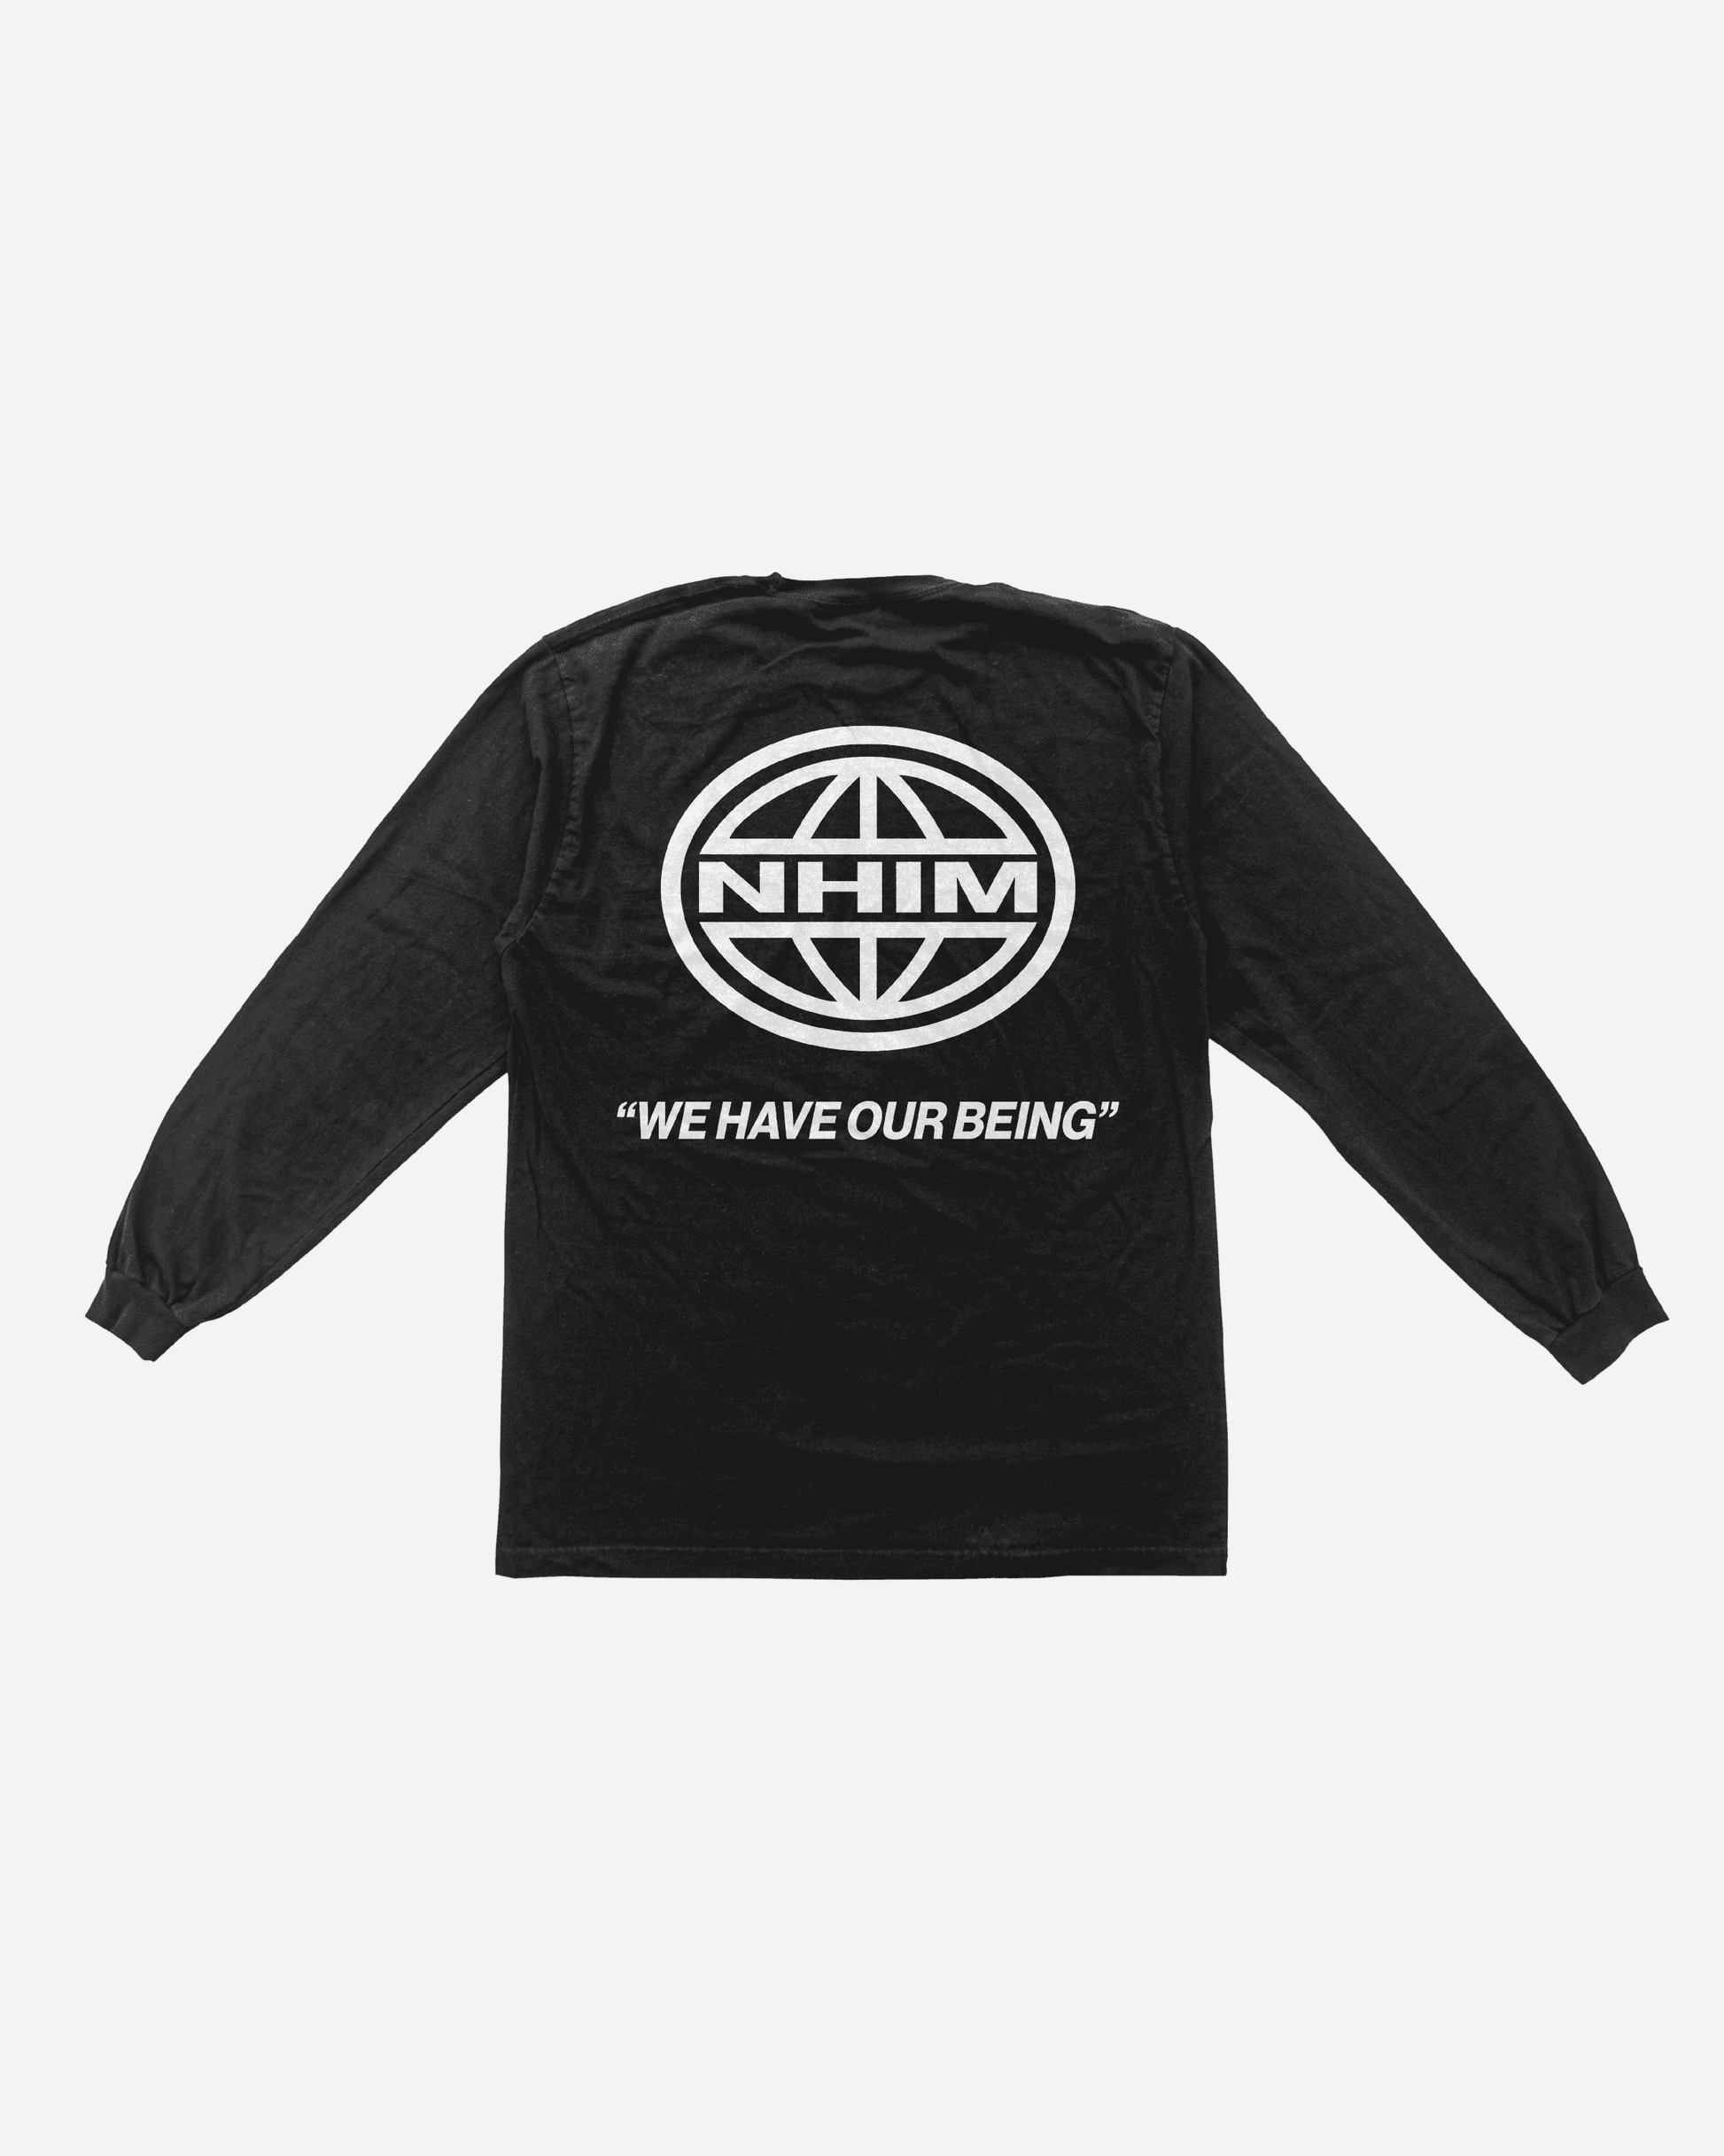 NHIM We have our being brand long sleeve tee in black by NHIM Apparel Christian clothing brand